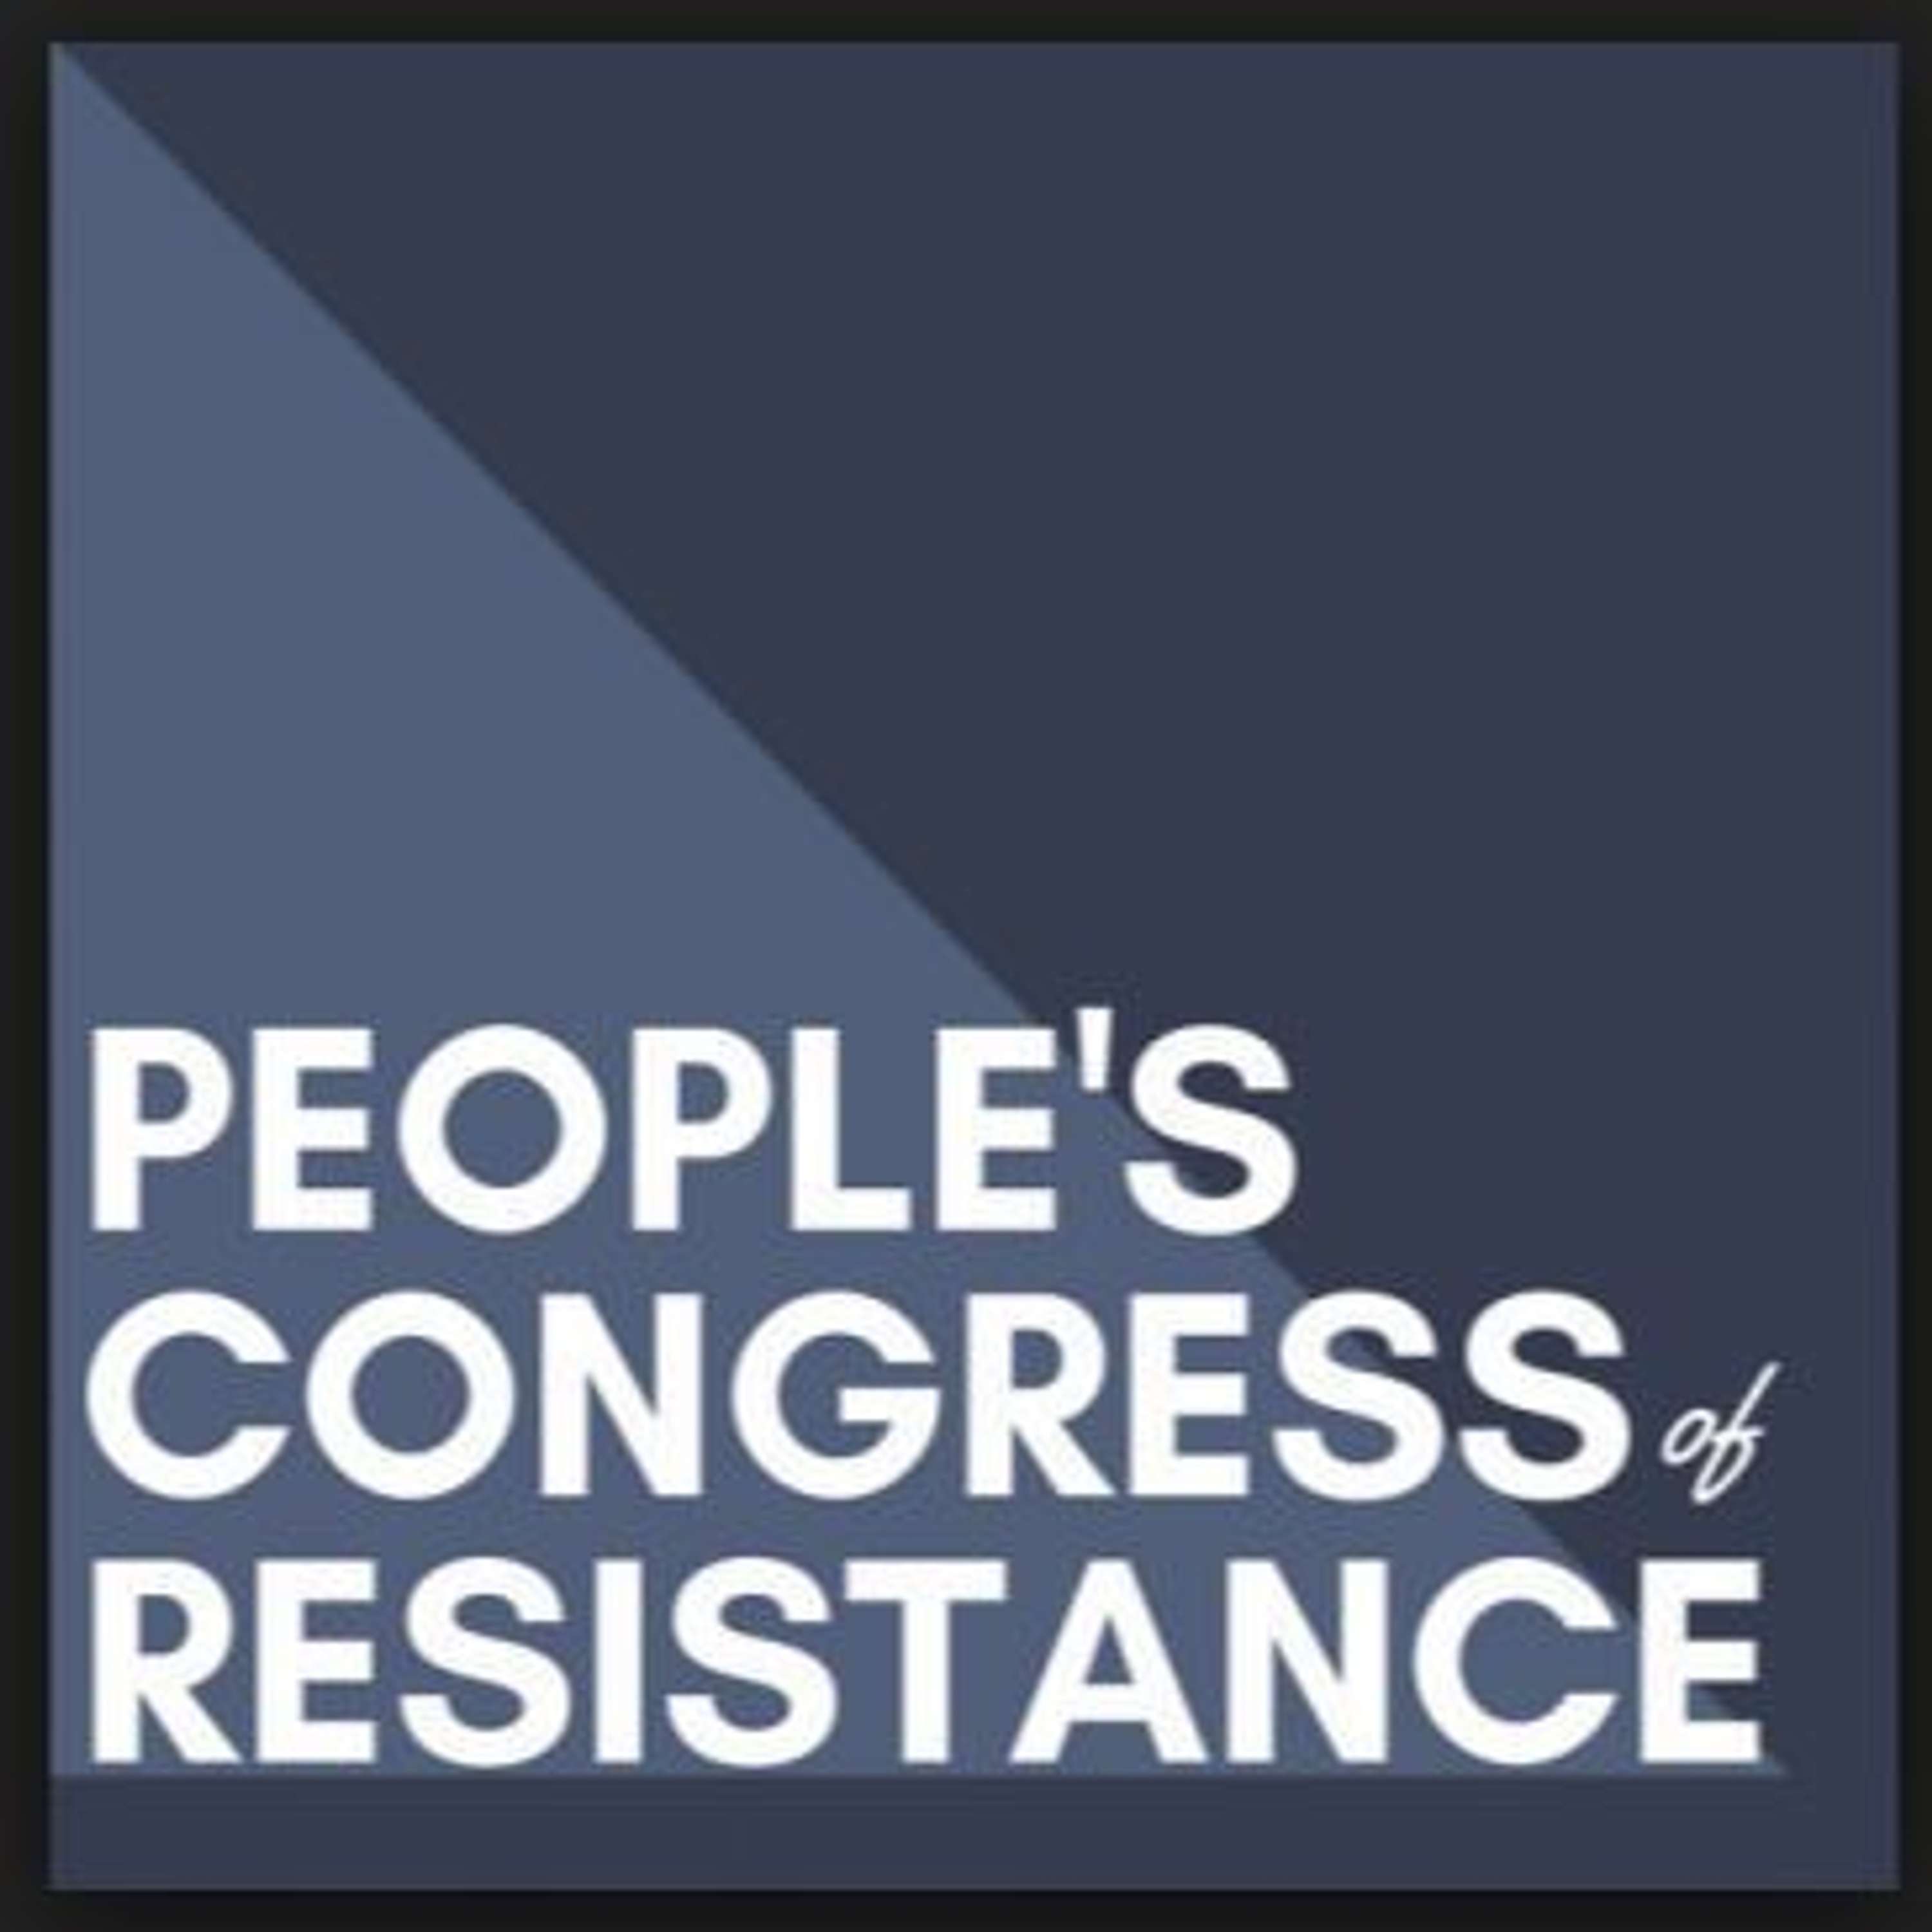 Ep 28: Party Congress of Resistance w Derek Ford